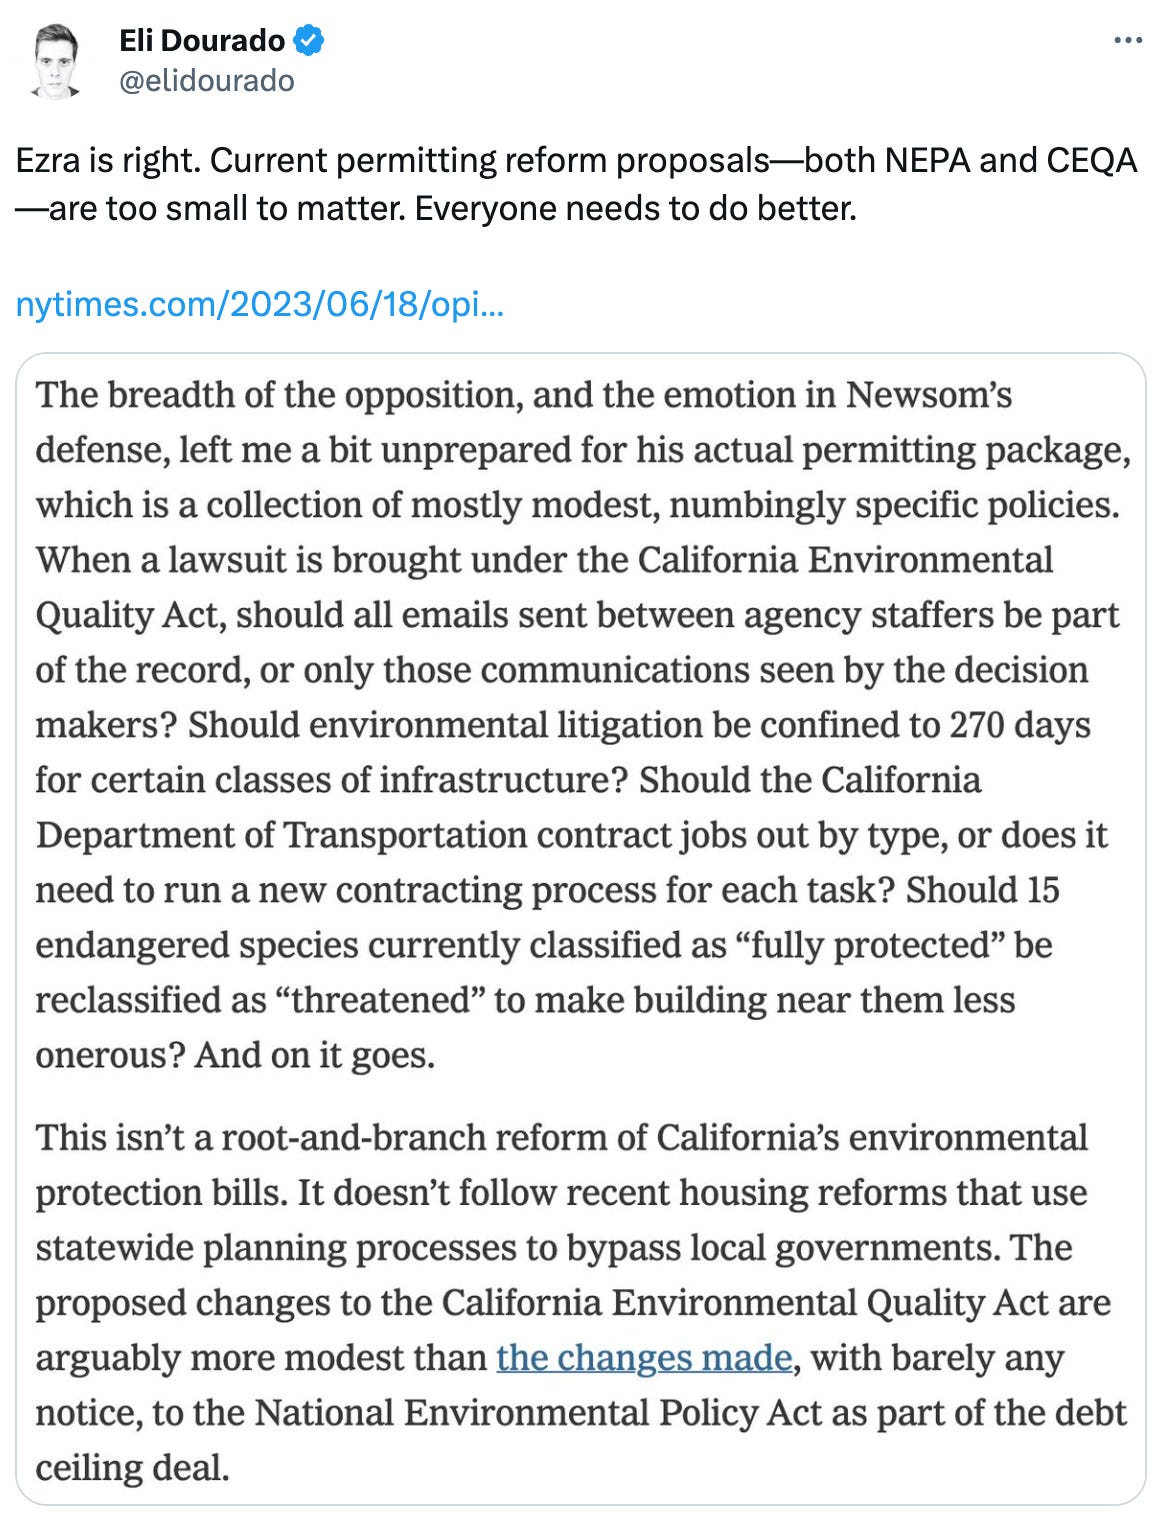  See new Tweets Conversation Eli Dourado @elidourado Ezra is right. Current permitting reform proposals—both NEPA and CEQA—are too small to matter. Everyone needs to do better.  https://nytimes.com/2023/06/18/opinion/newsom-california-building-permitting-procurement.html